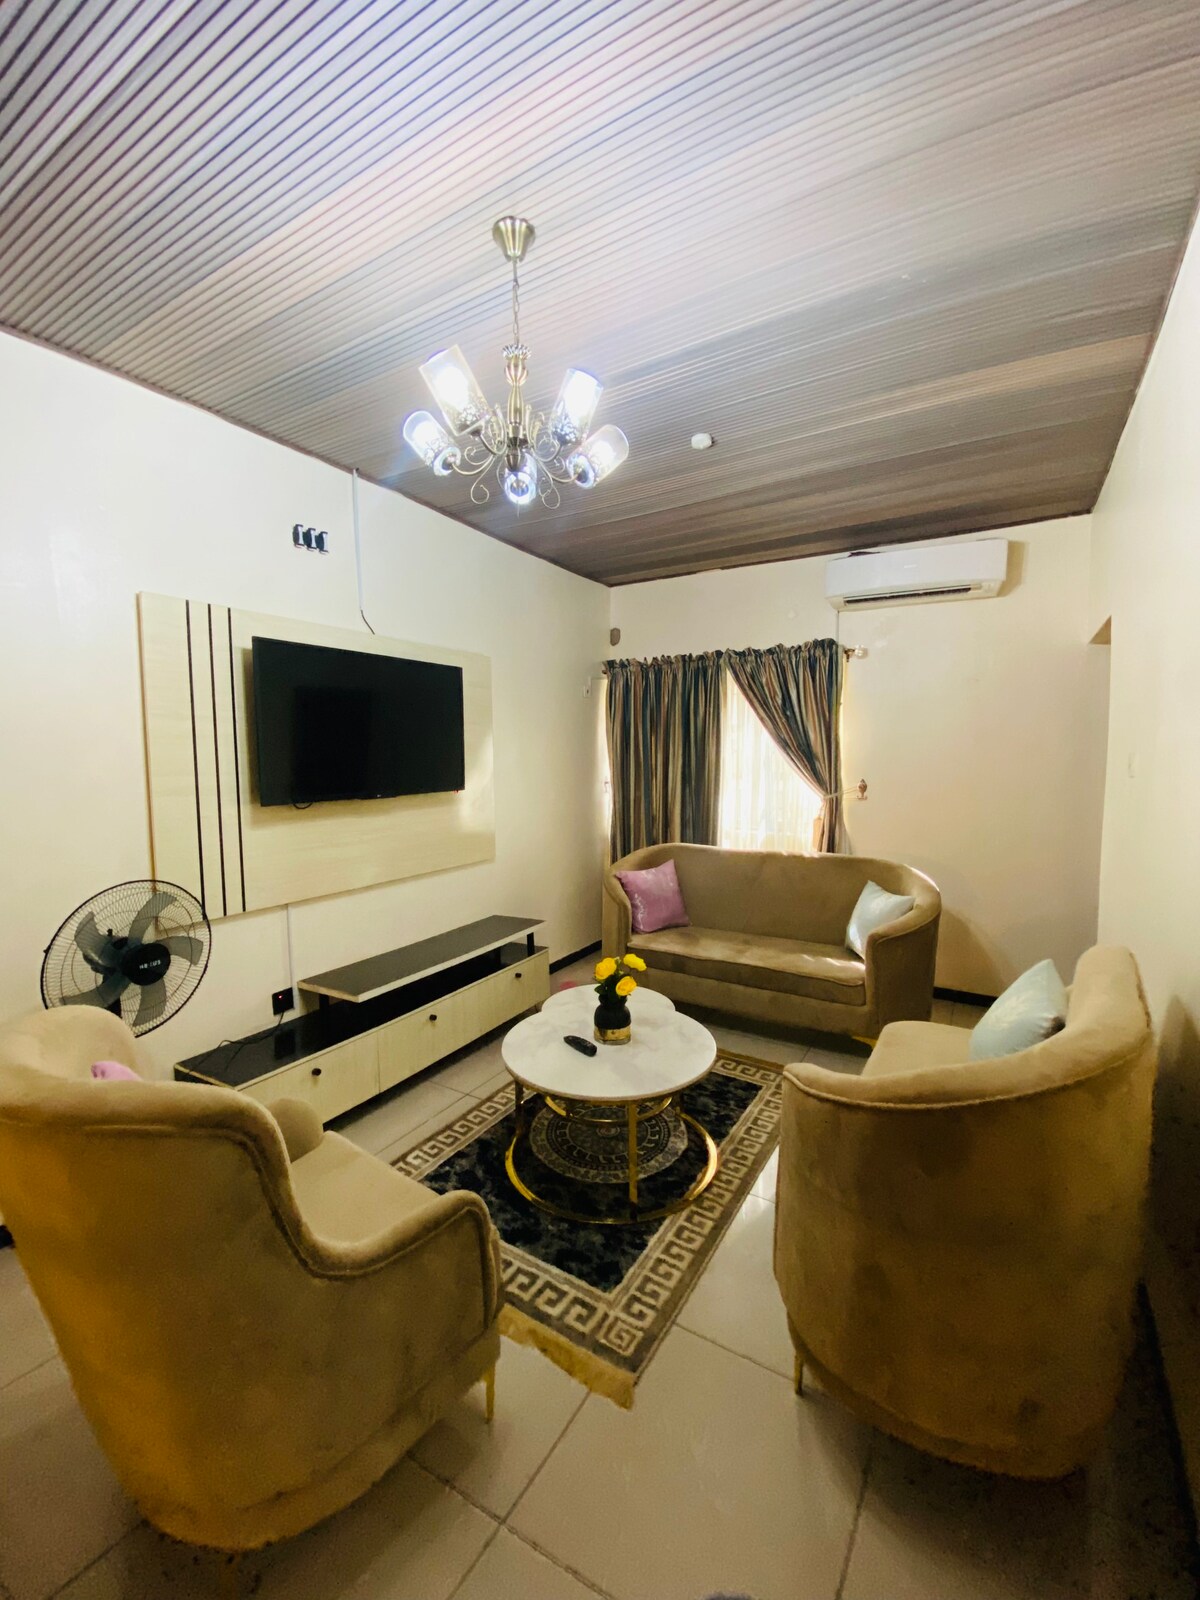 Cheerful and beautiful 4 bedroom duplex apartment